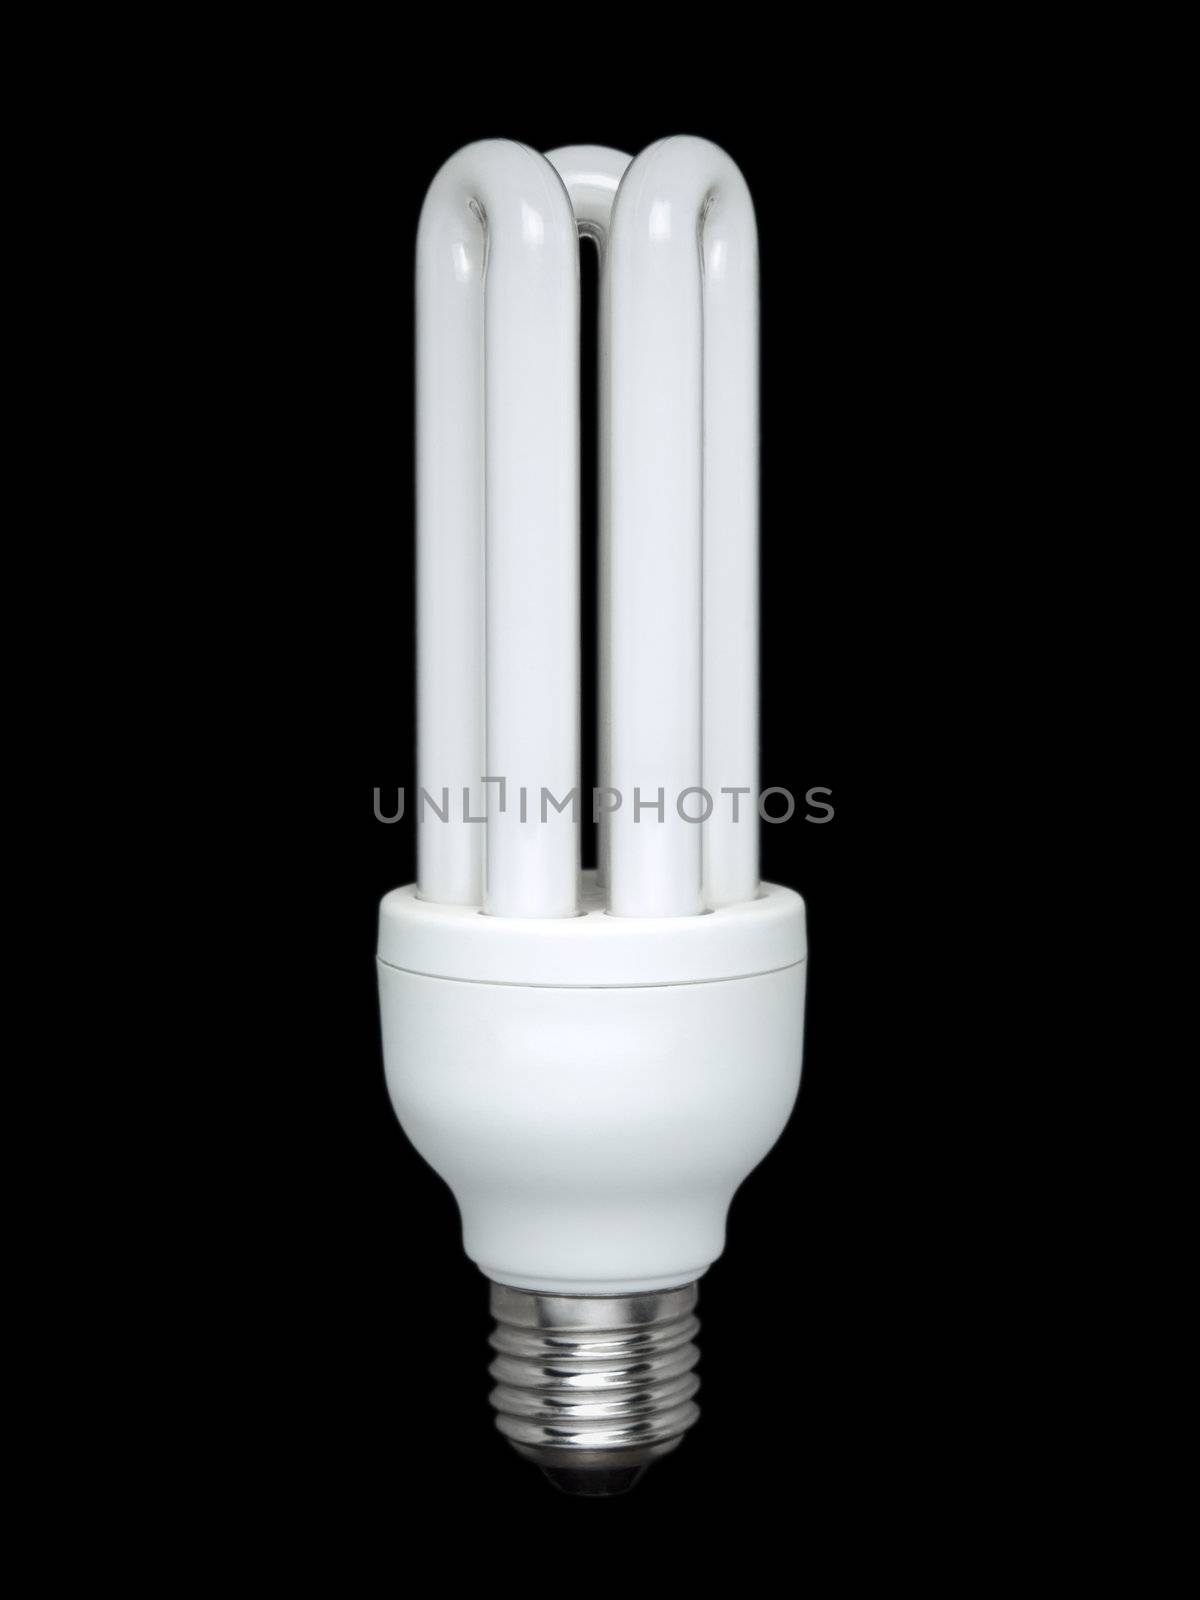 Compact fluorescent light bulb over a black background.